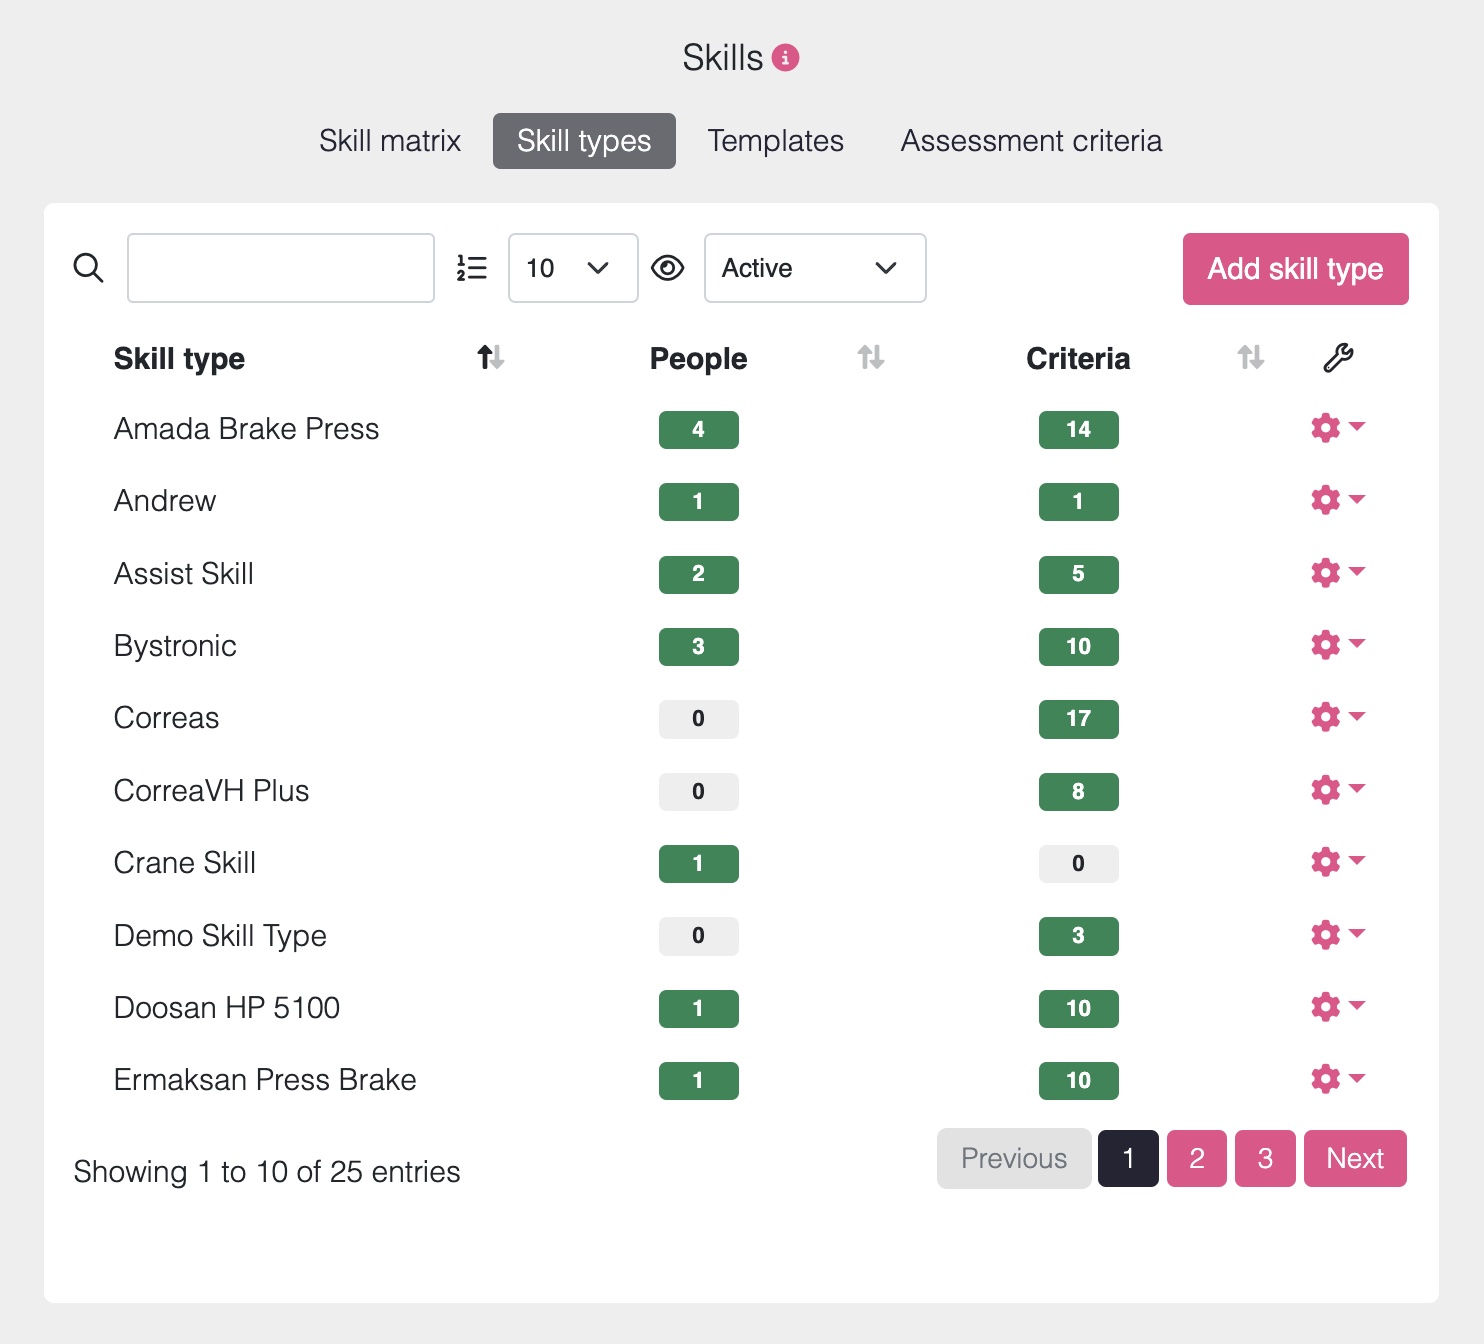 Screenshot showing overview of how many people and assessment criteria are assigned to each skill type.